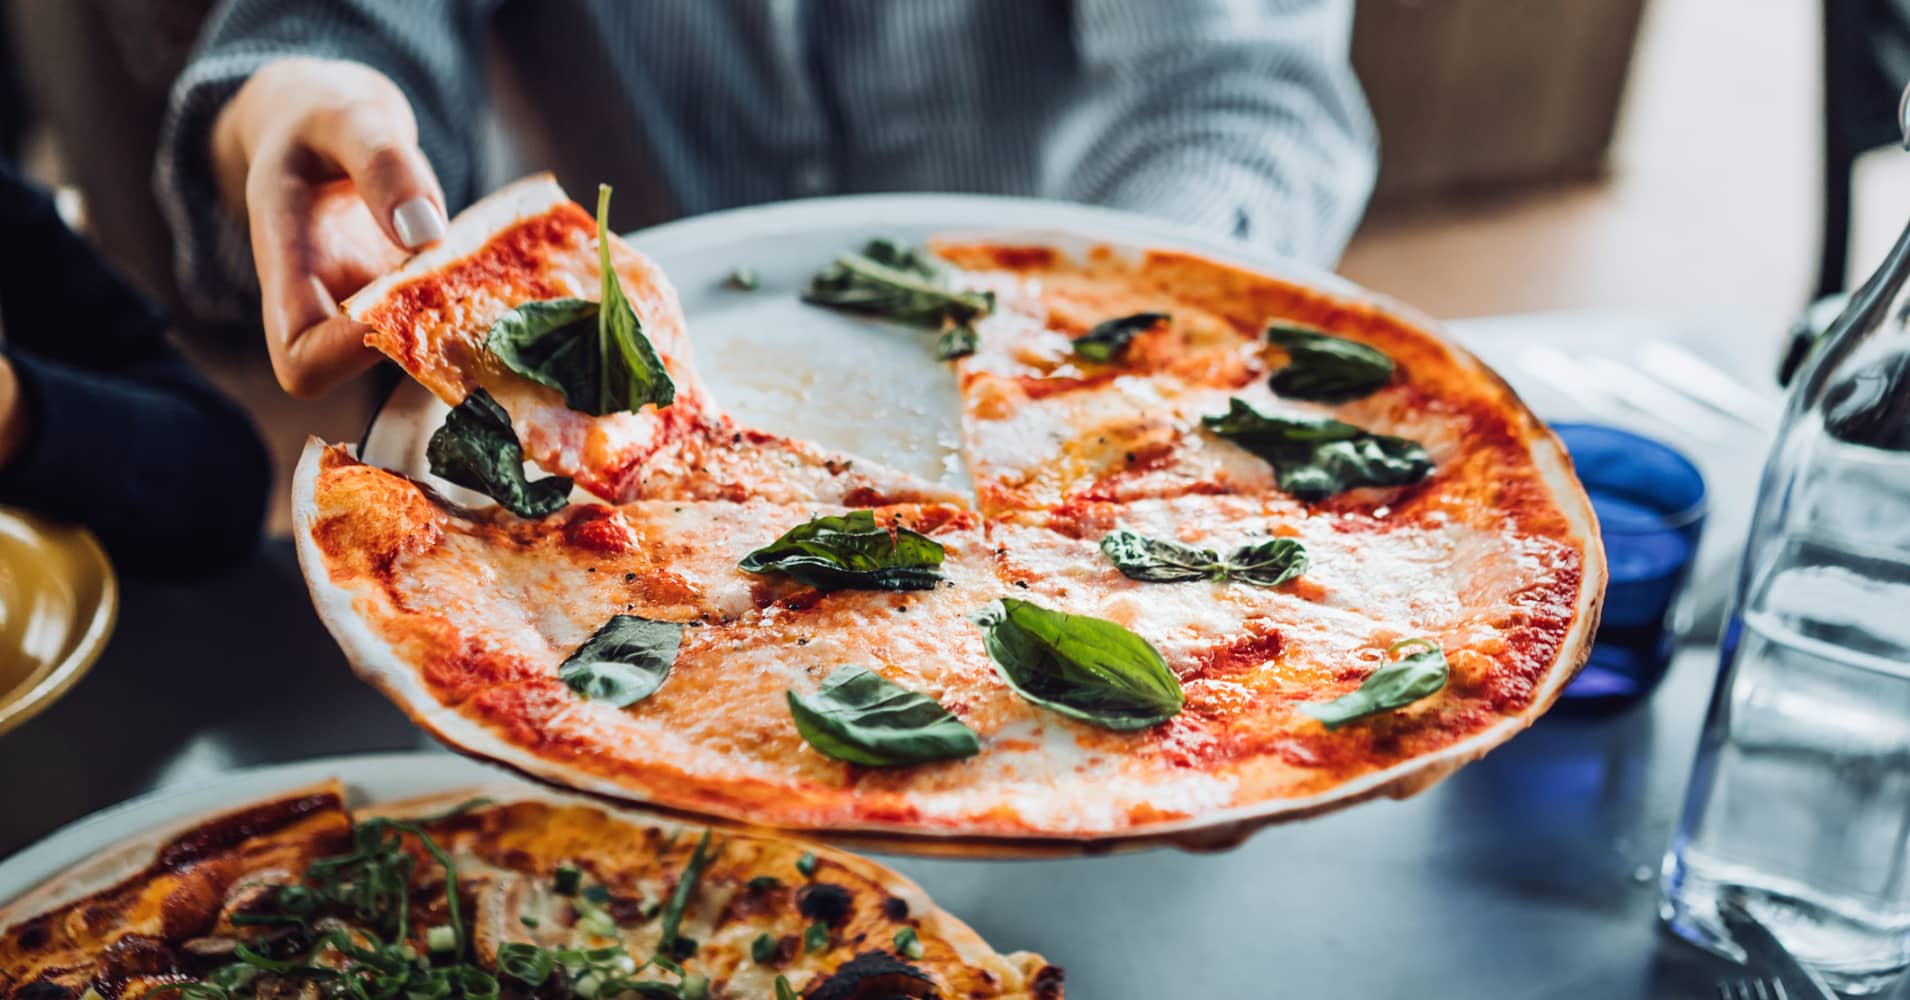 new york city has the nation's most expensive pizza—here's how your city stacks up